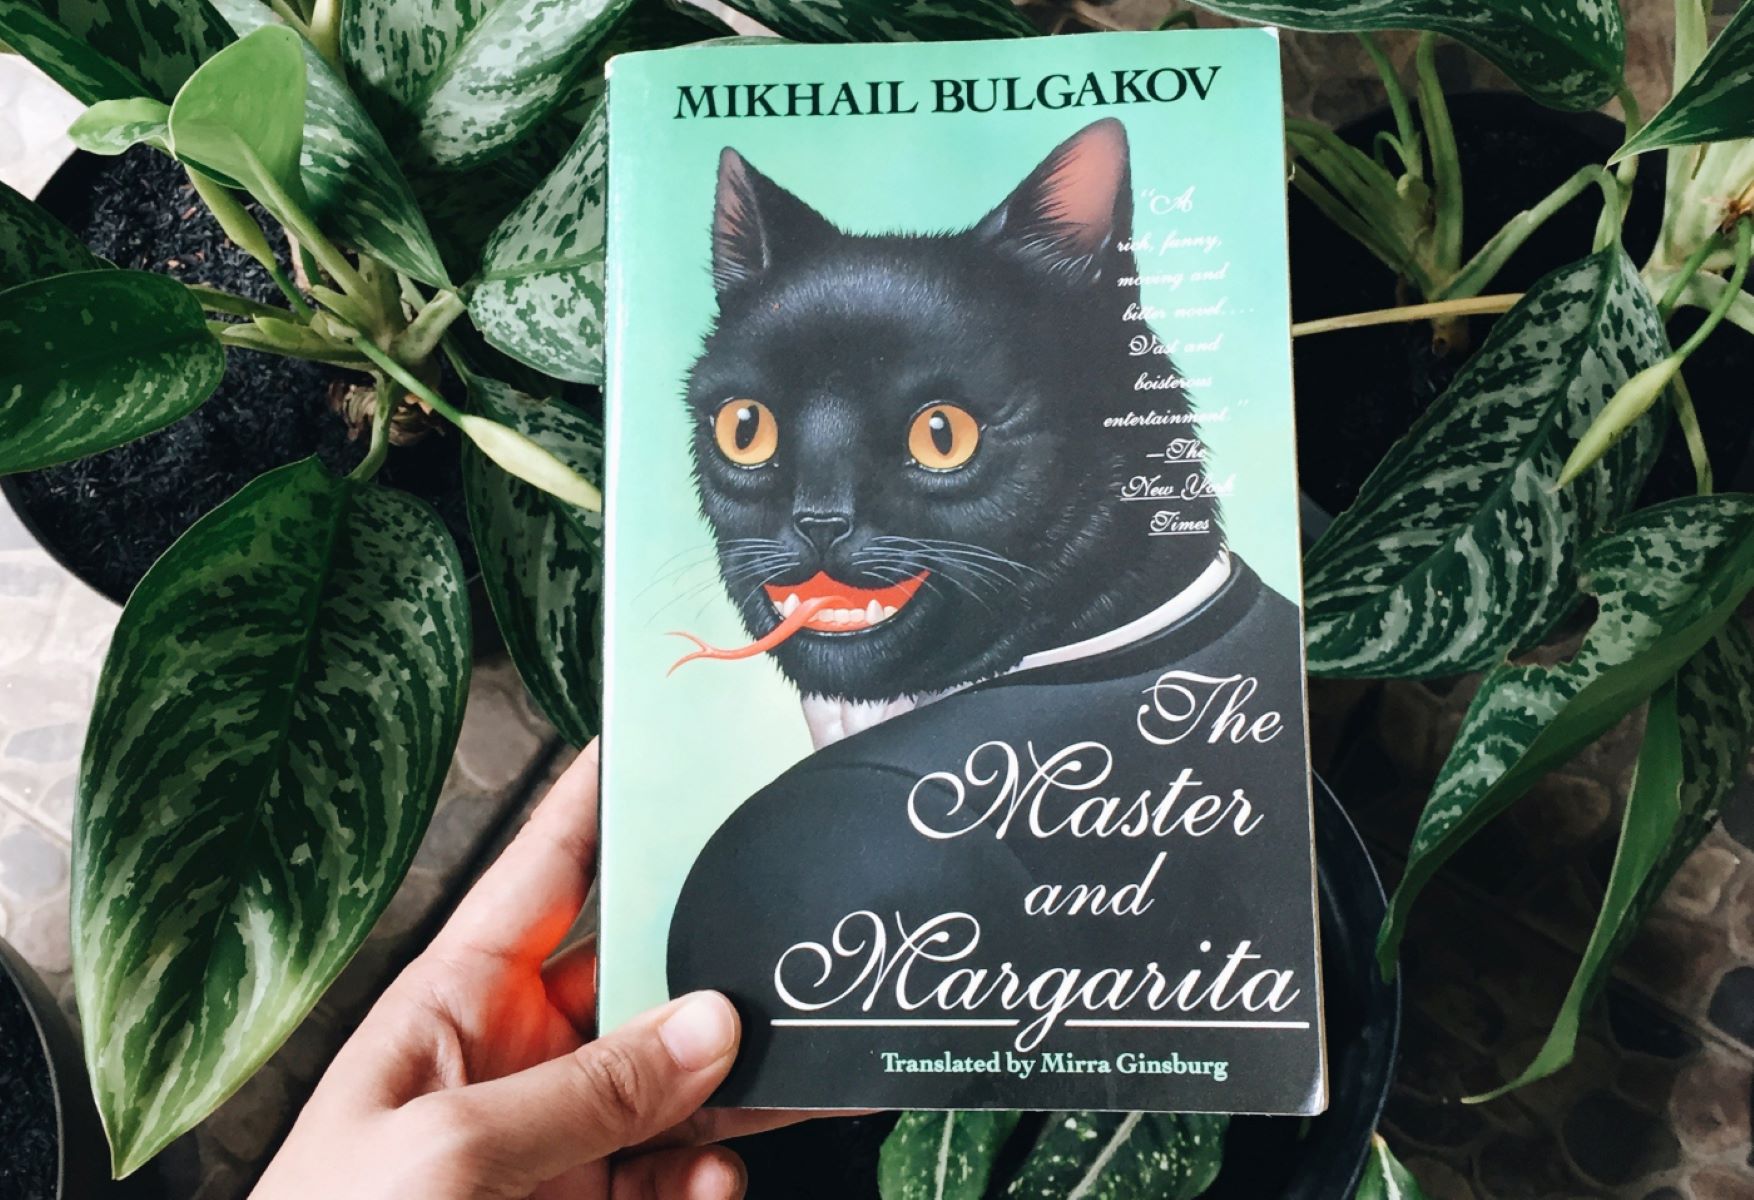 14-mind-blowing-facts-about-the-master-and-margarita-mikhail-bulgakov